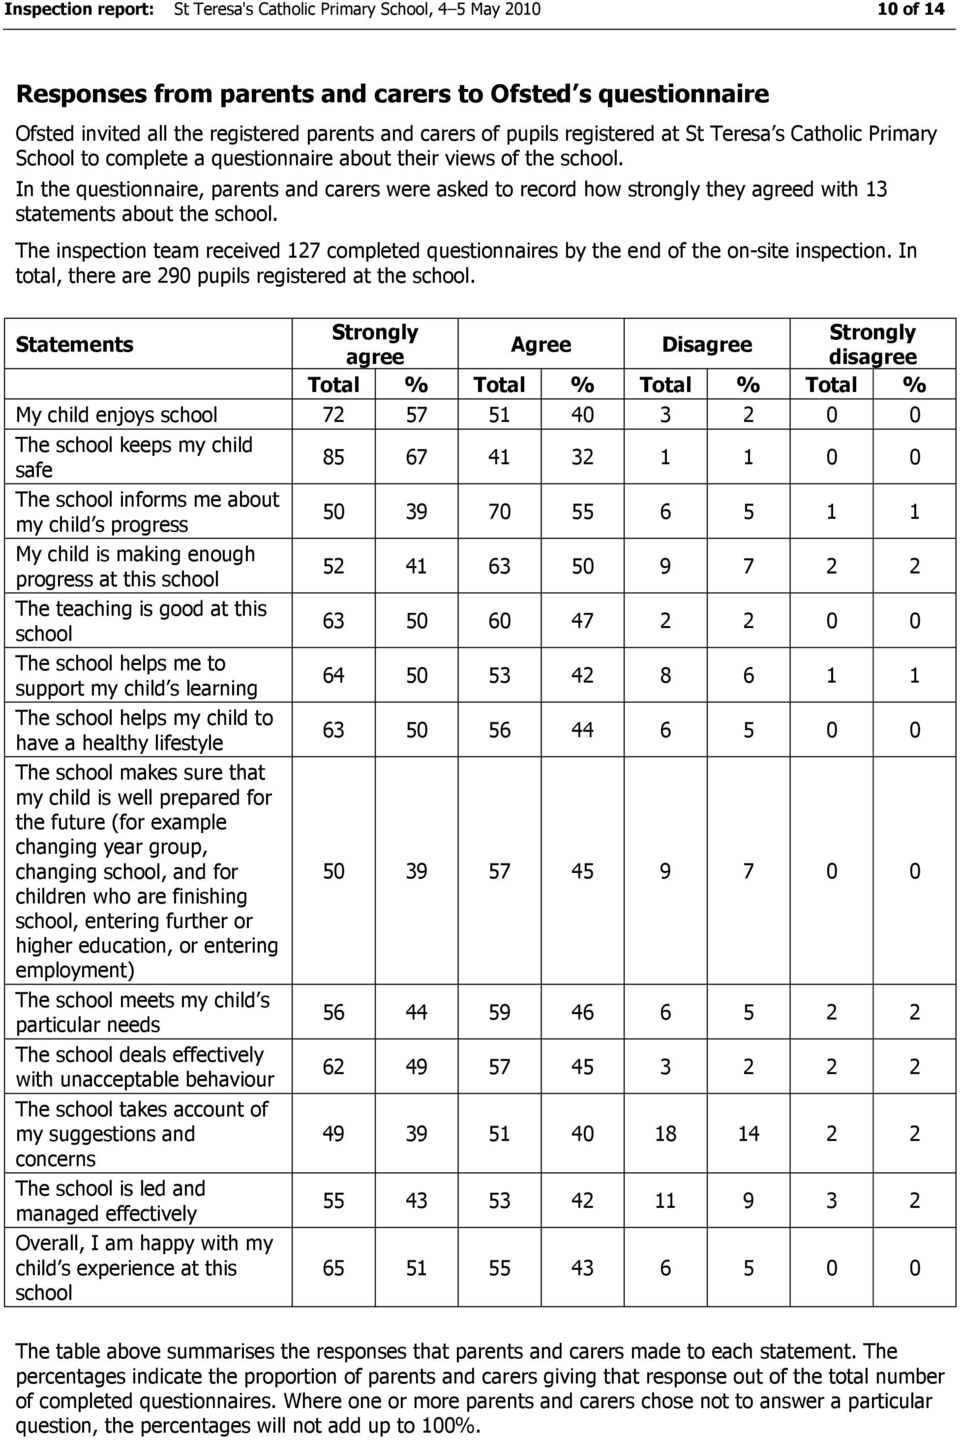 In the questionnaire, parents and carers were asked to record how strongly they agreed with 3 statements about the school.